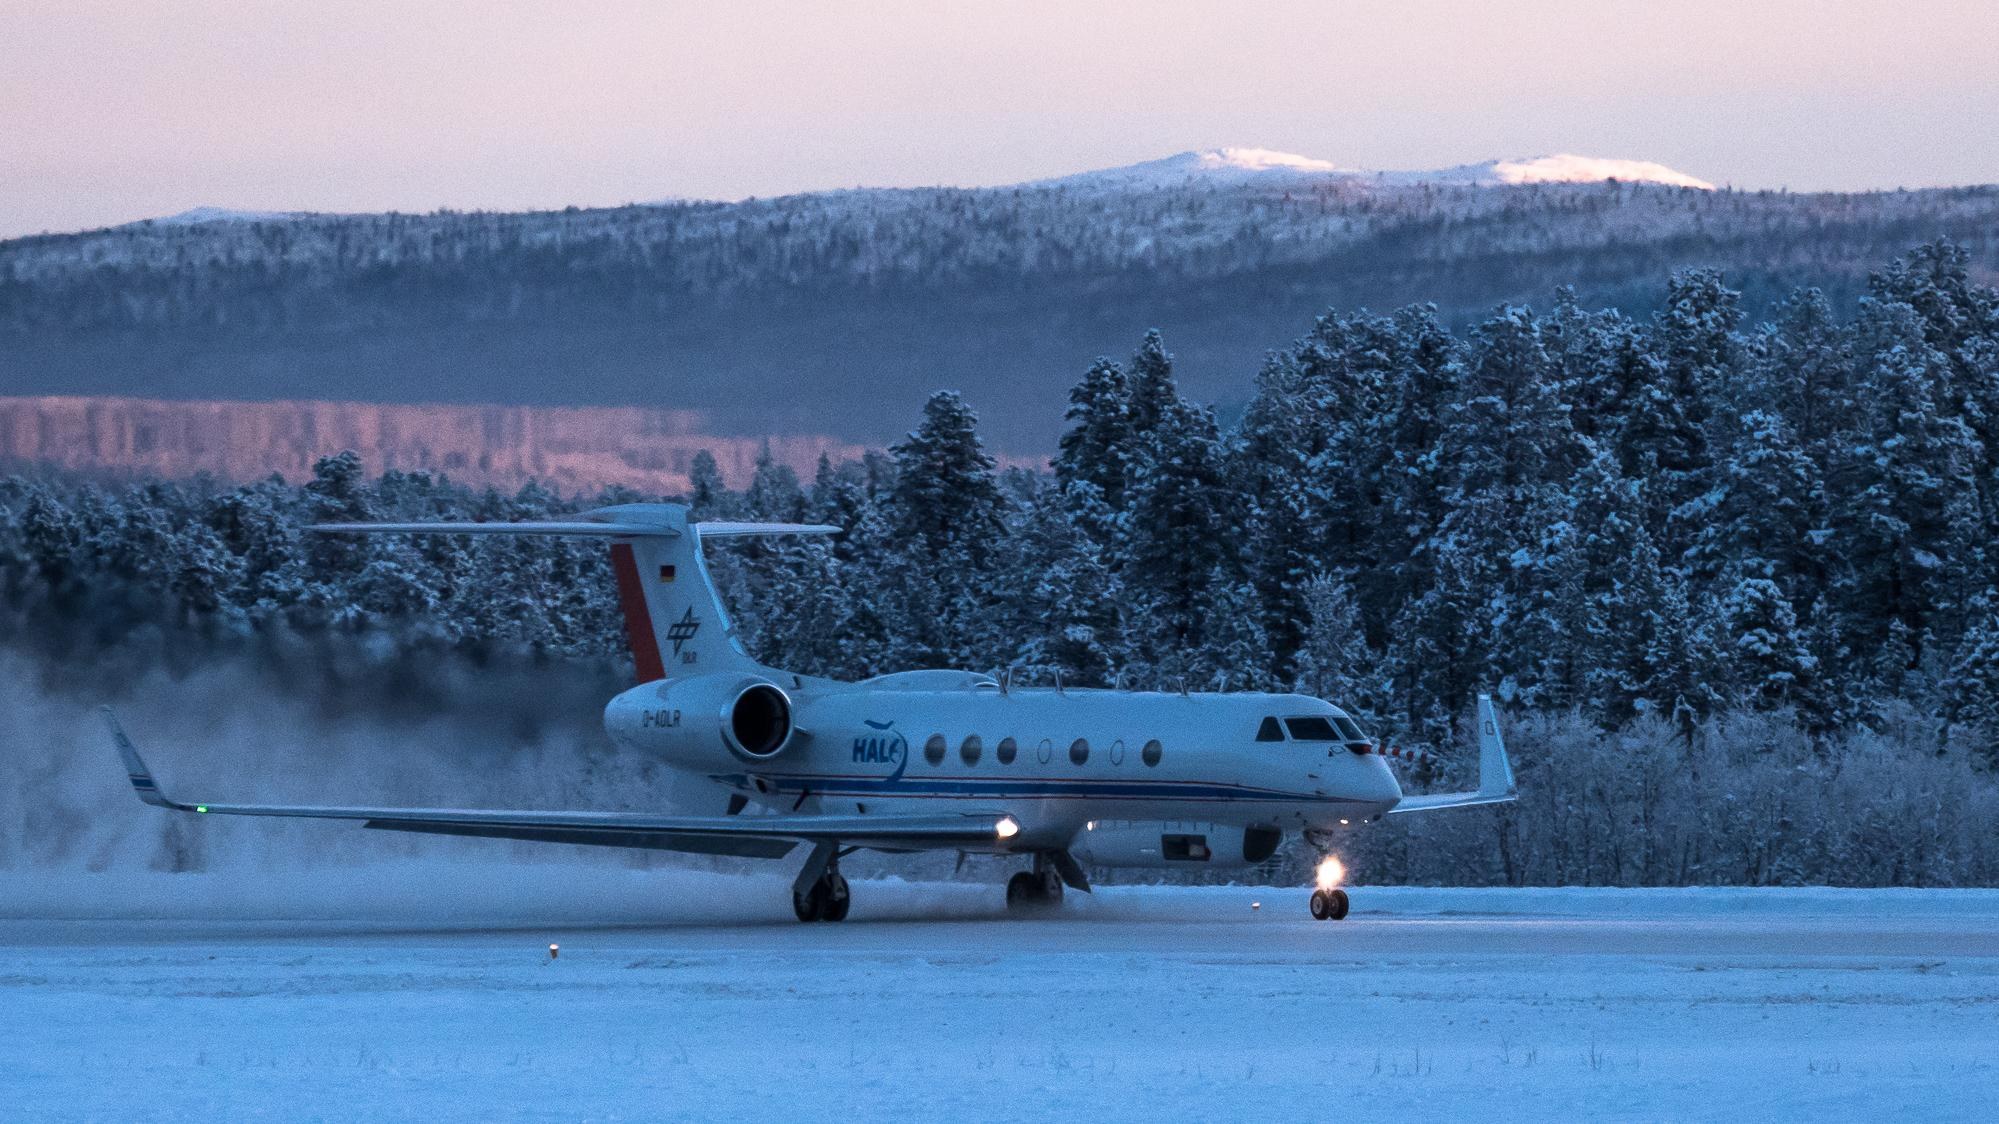 HALO research aircraft at Kiruna in northern Sweden